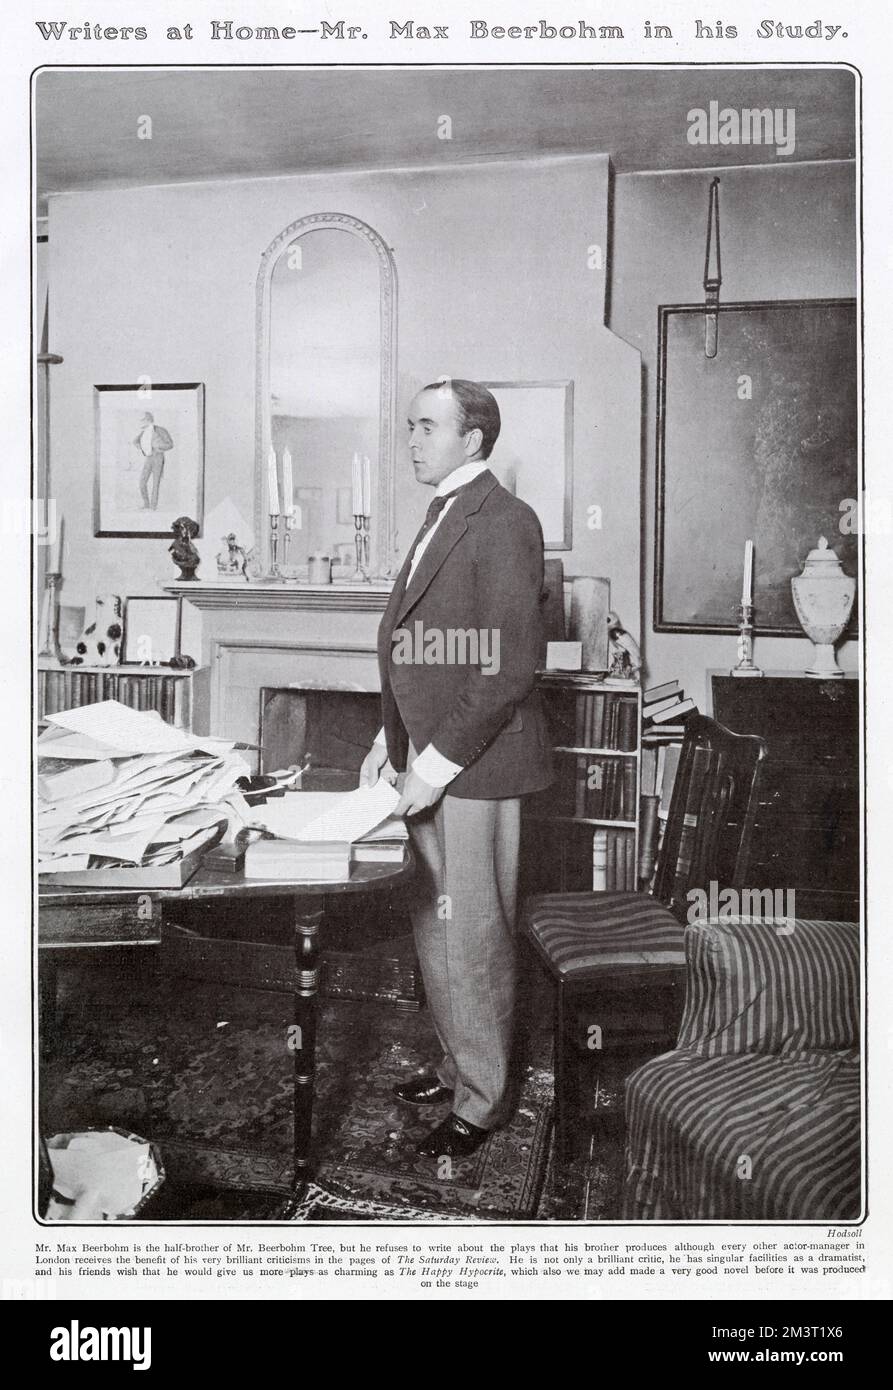 Max Beerbohm (1872 - 1956), writer and dramatist, pictured in his study at home in 1905, part of a series of photographs in The Tatler showing literary figures in their homes. Stock Photo